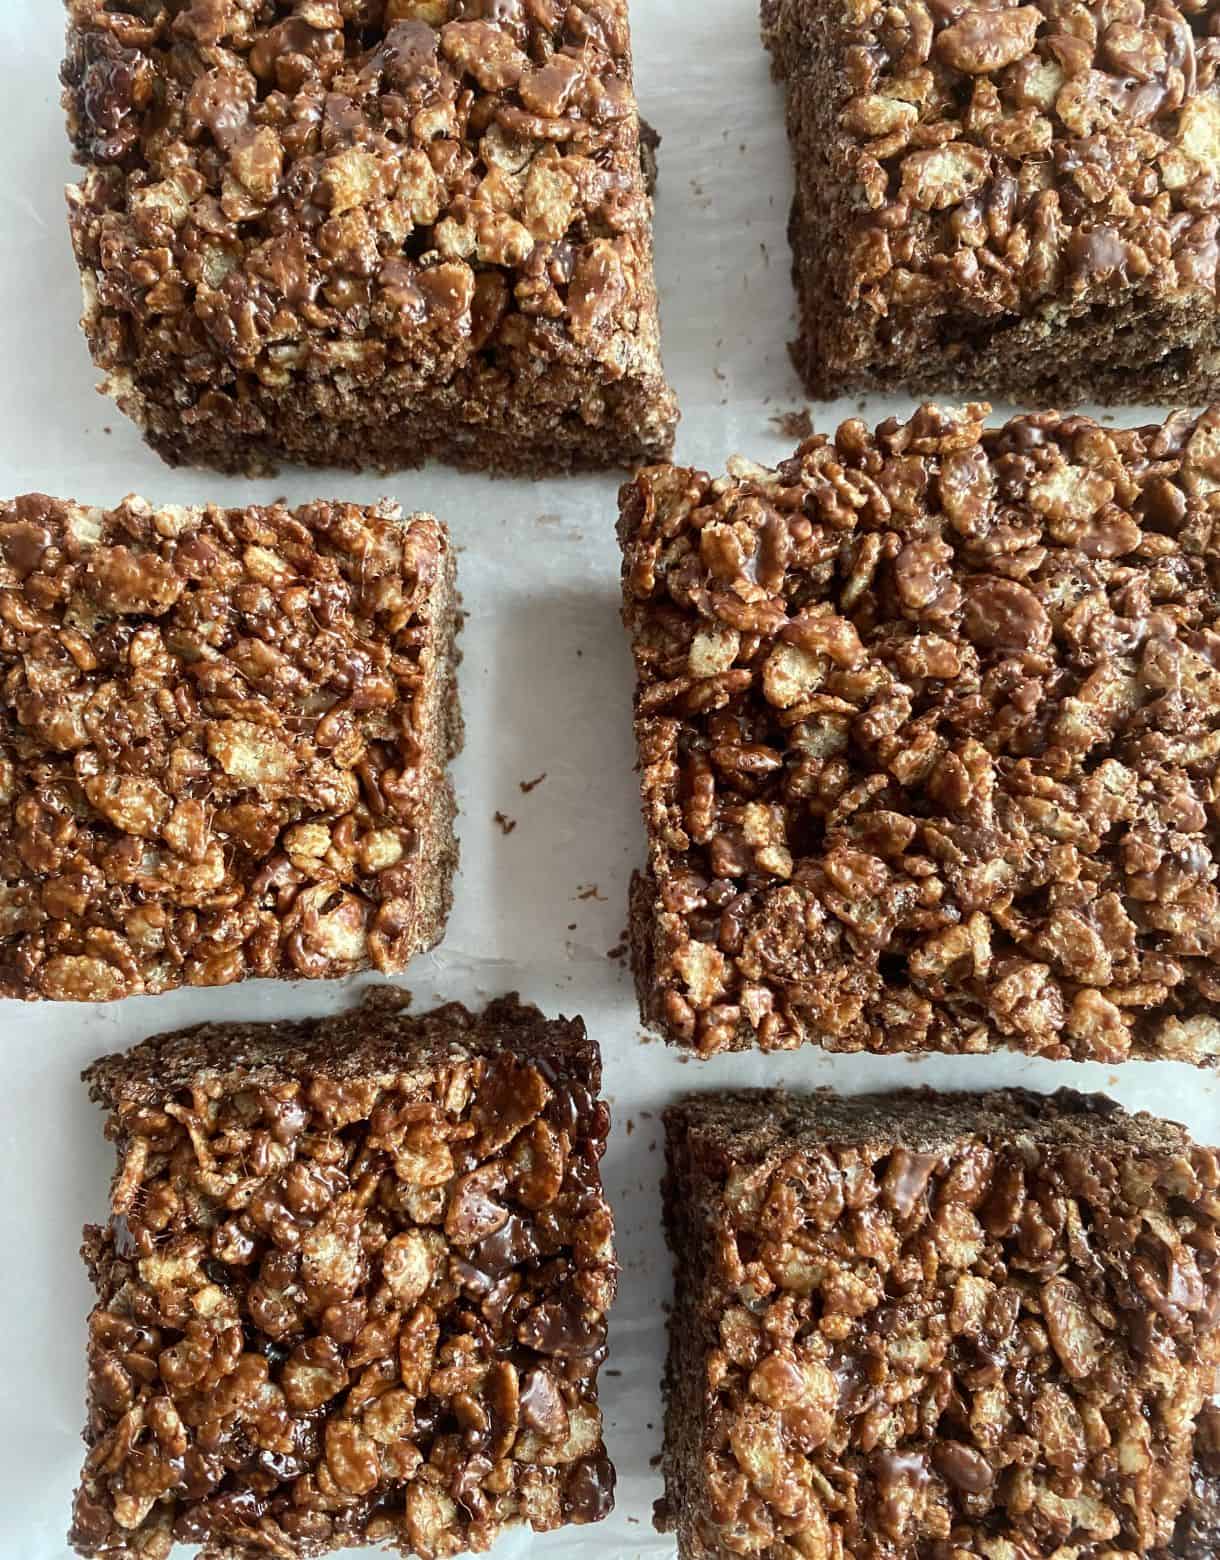 Six Chocoate Rice Krispie Treats cut into squares.